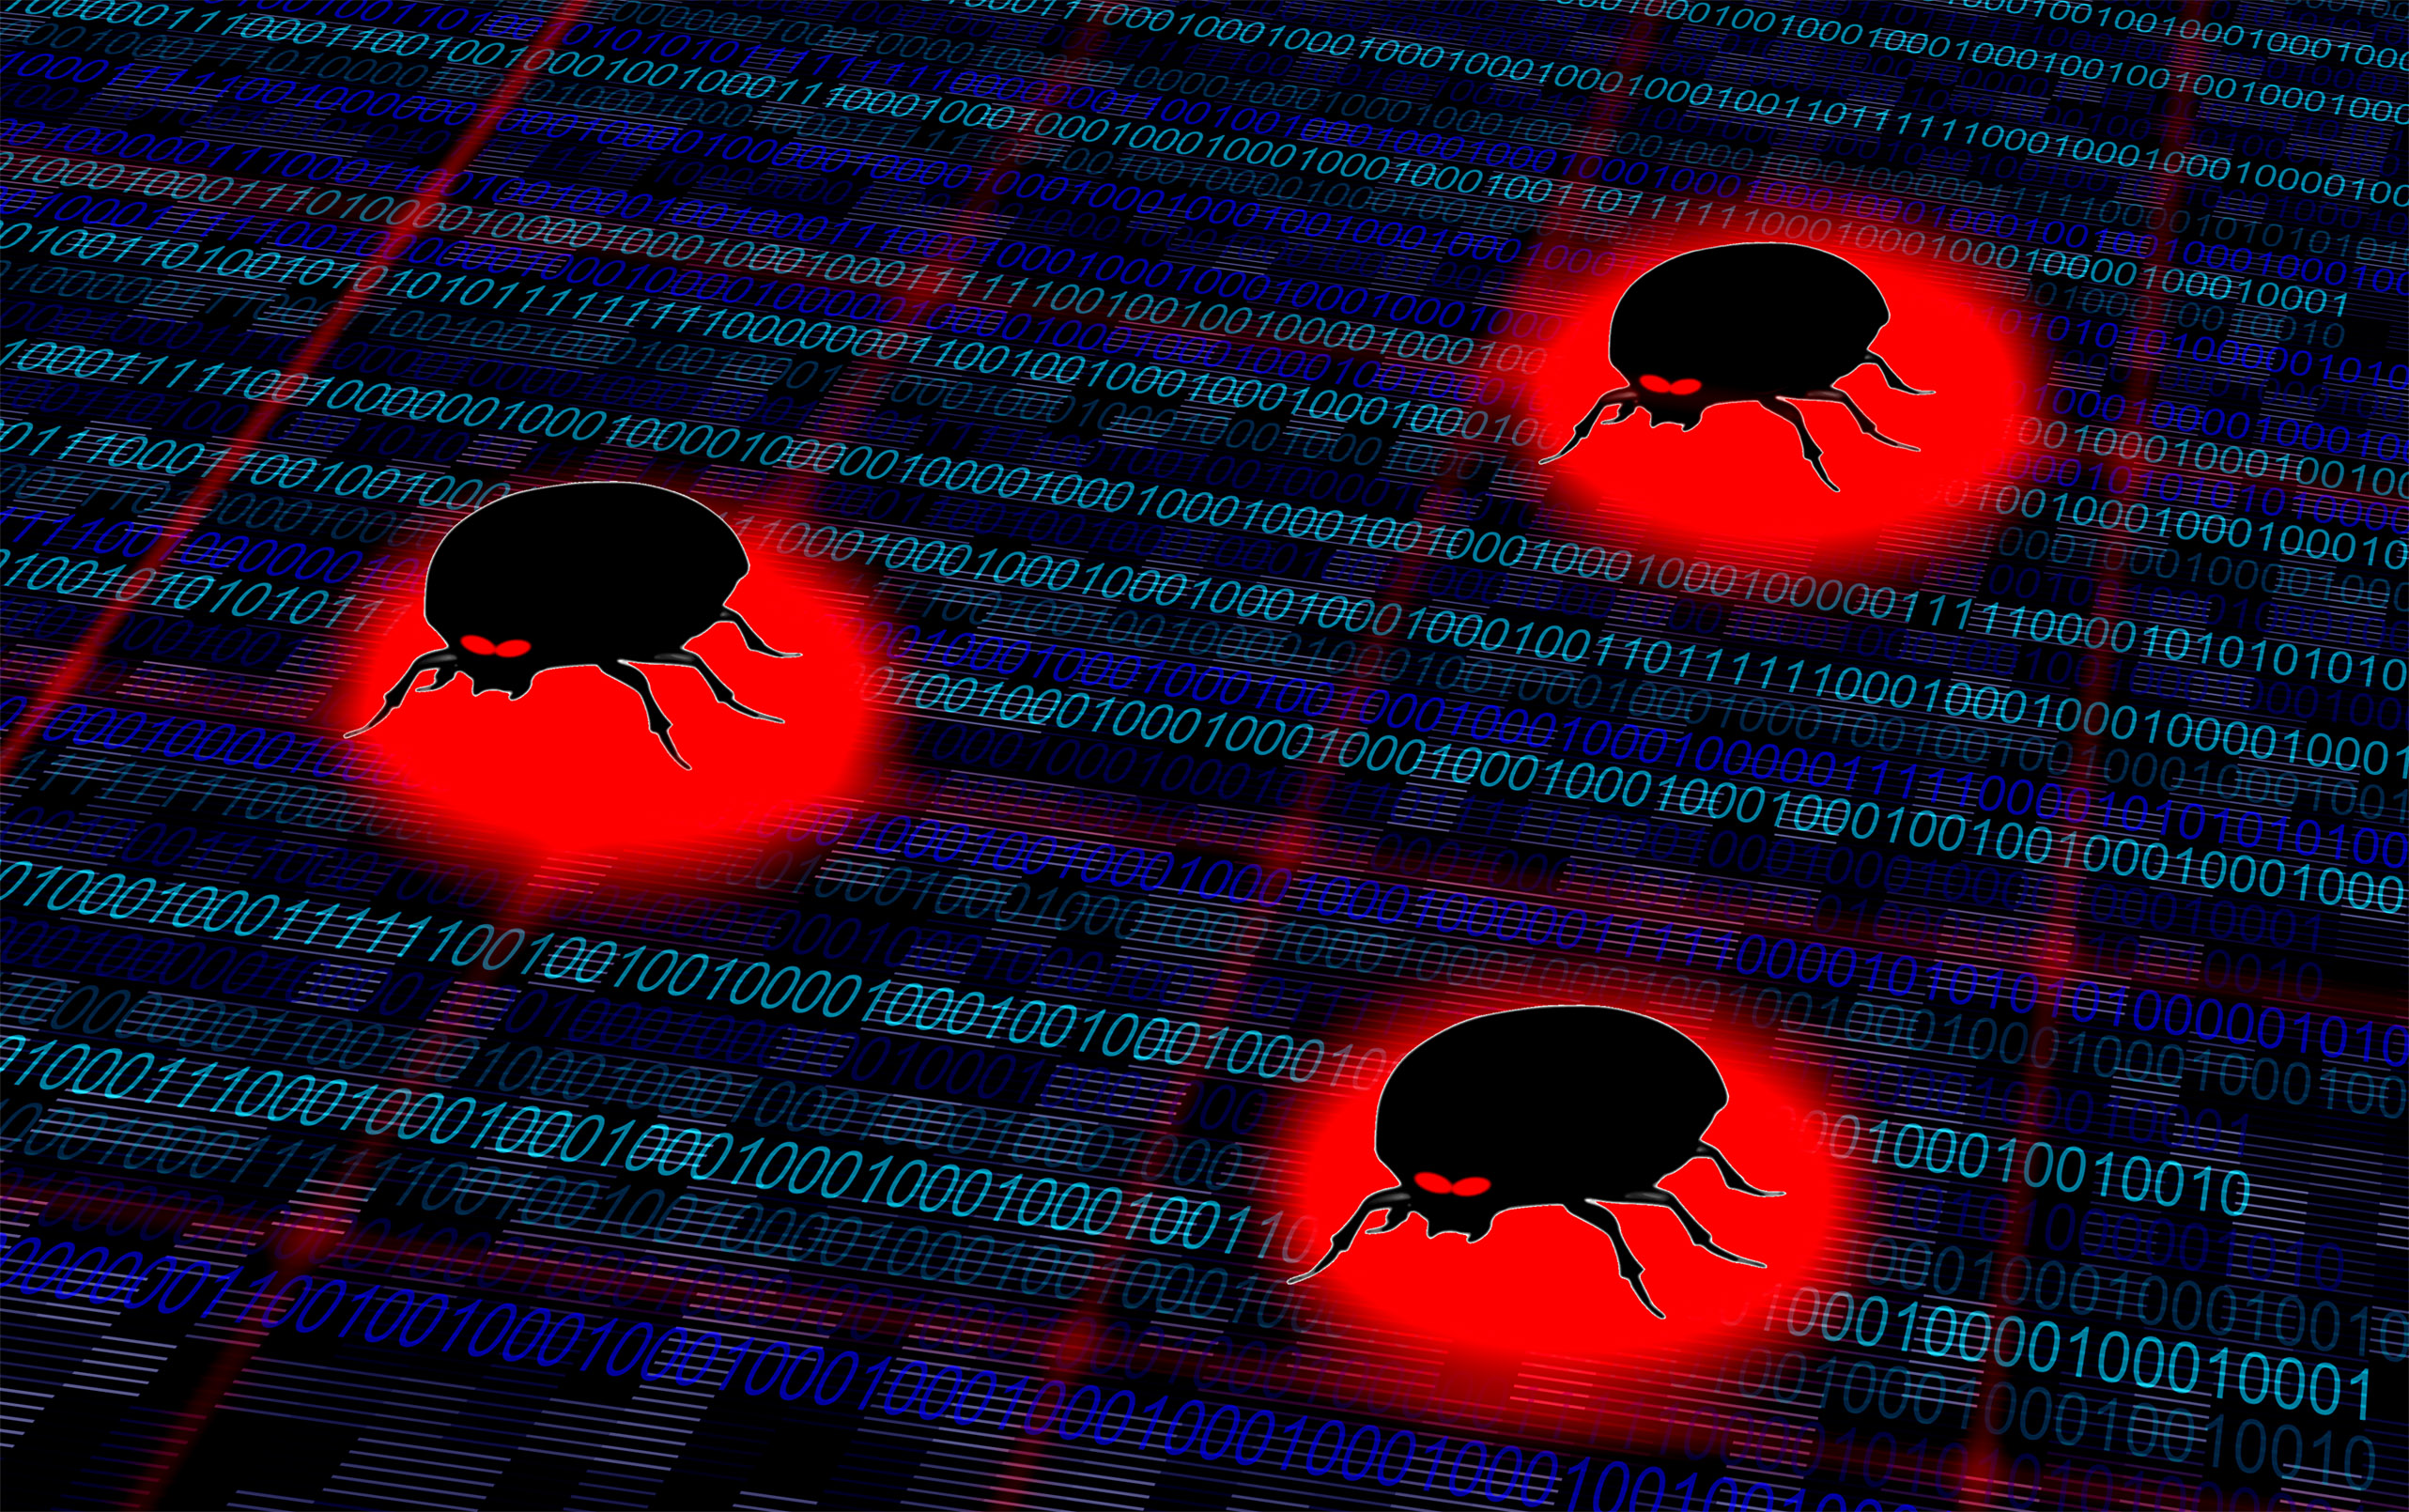 Black and red cartoon bugs attack code